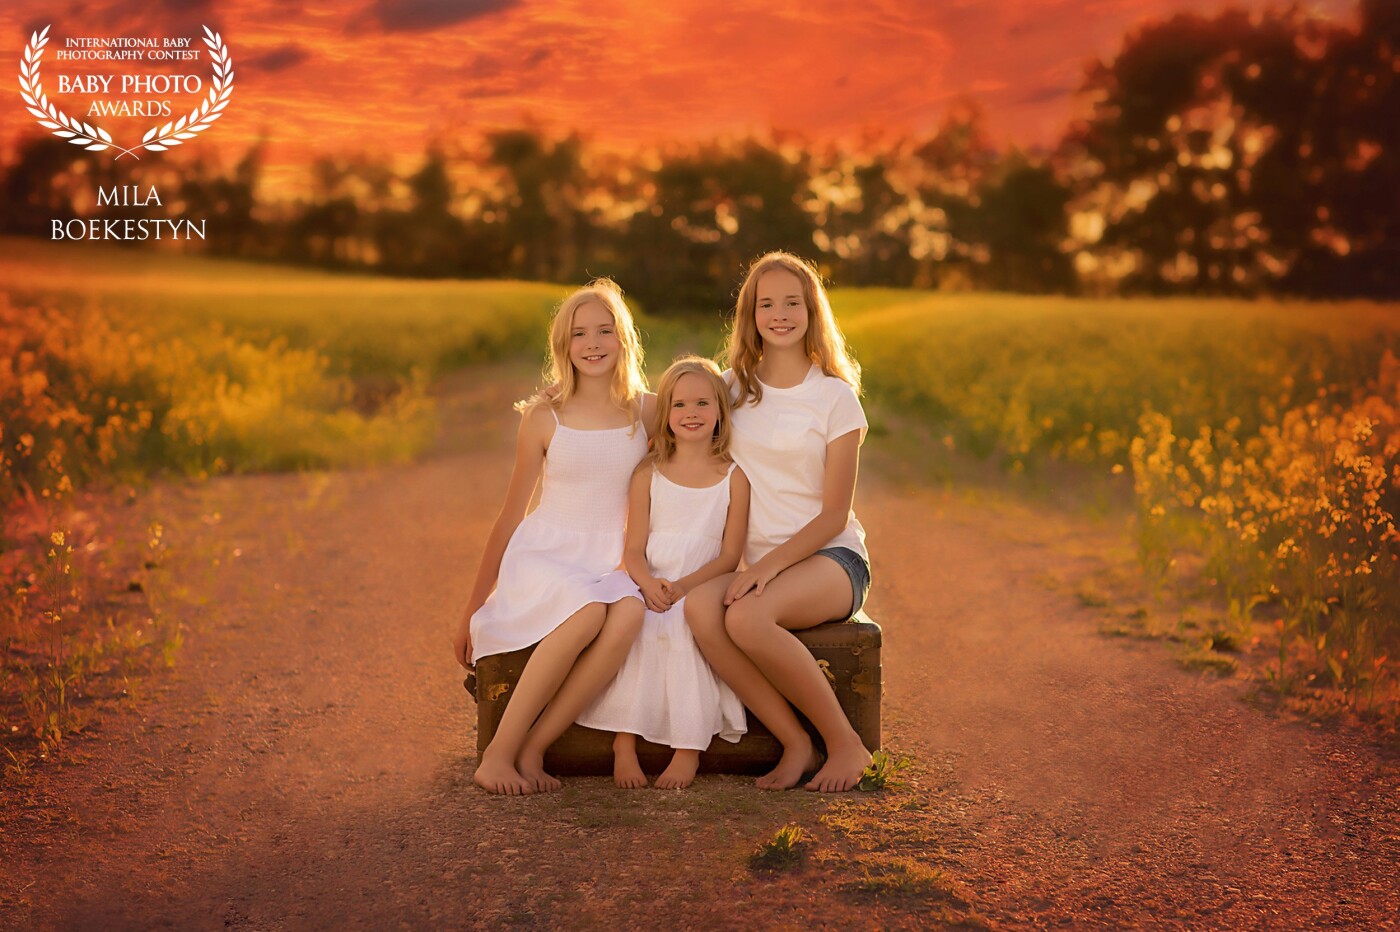 In Canada, Alberta we have beautiful Canola fields in July and as you drive by the countryside - all you see are fields and fields of beautiful yellow flowers. What can be better than 3 sweet sisters on a dirt road surrounded by Canola field flowers and a sunset? This photo was inspired by my friend's @HocusFocusPhotography portrait of her daughters she took a few years back. Check out her work - she is amazing!